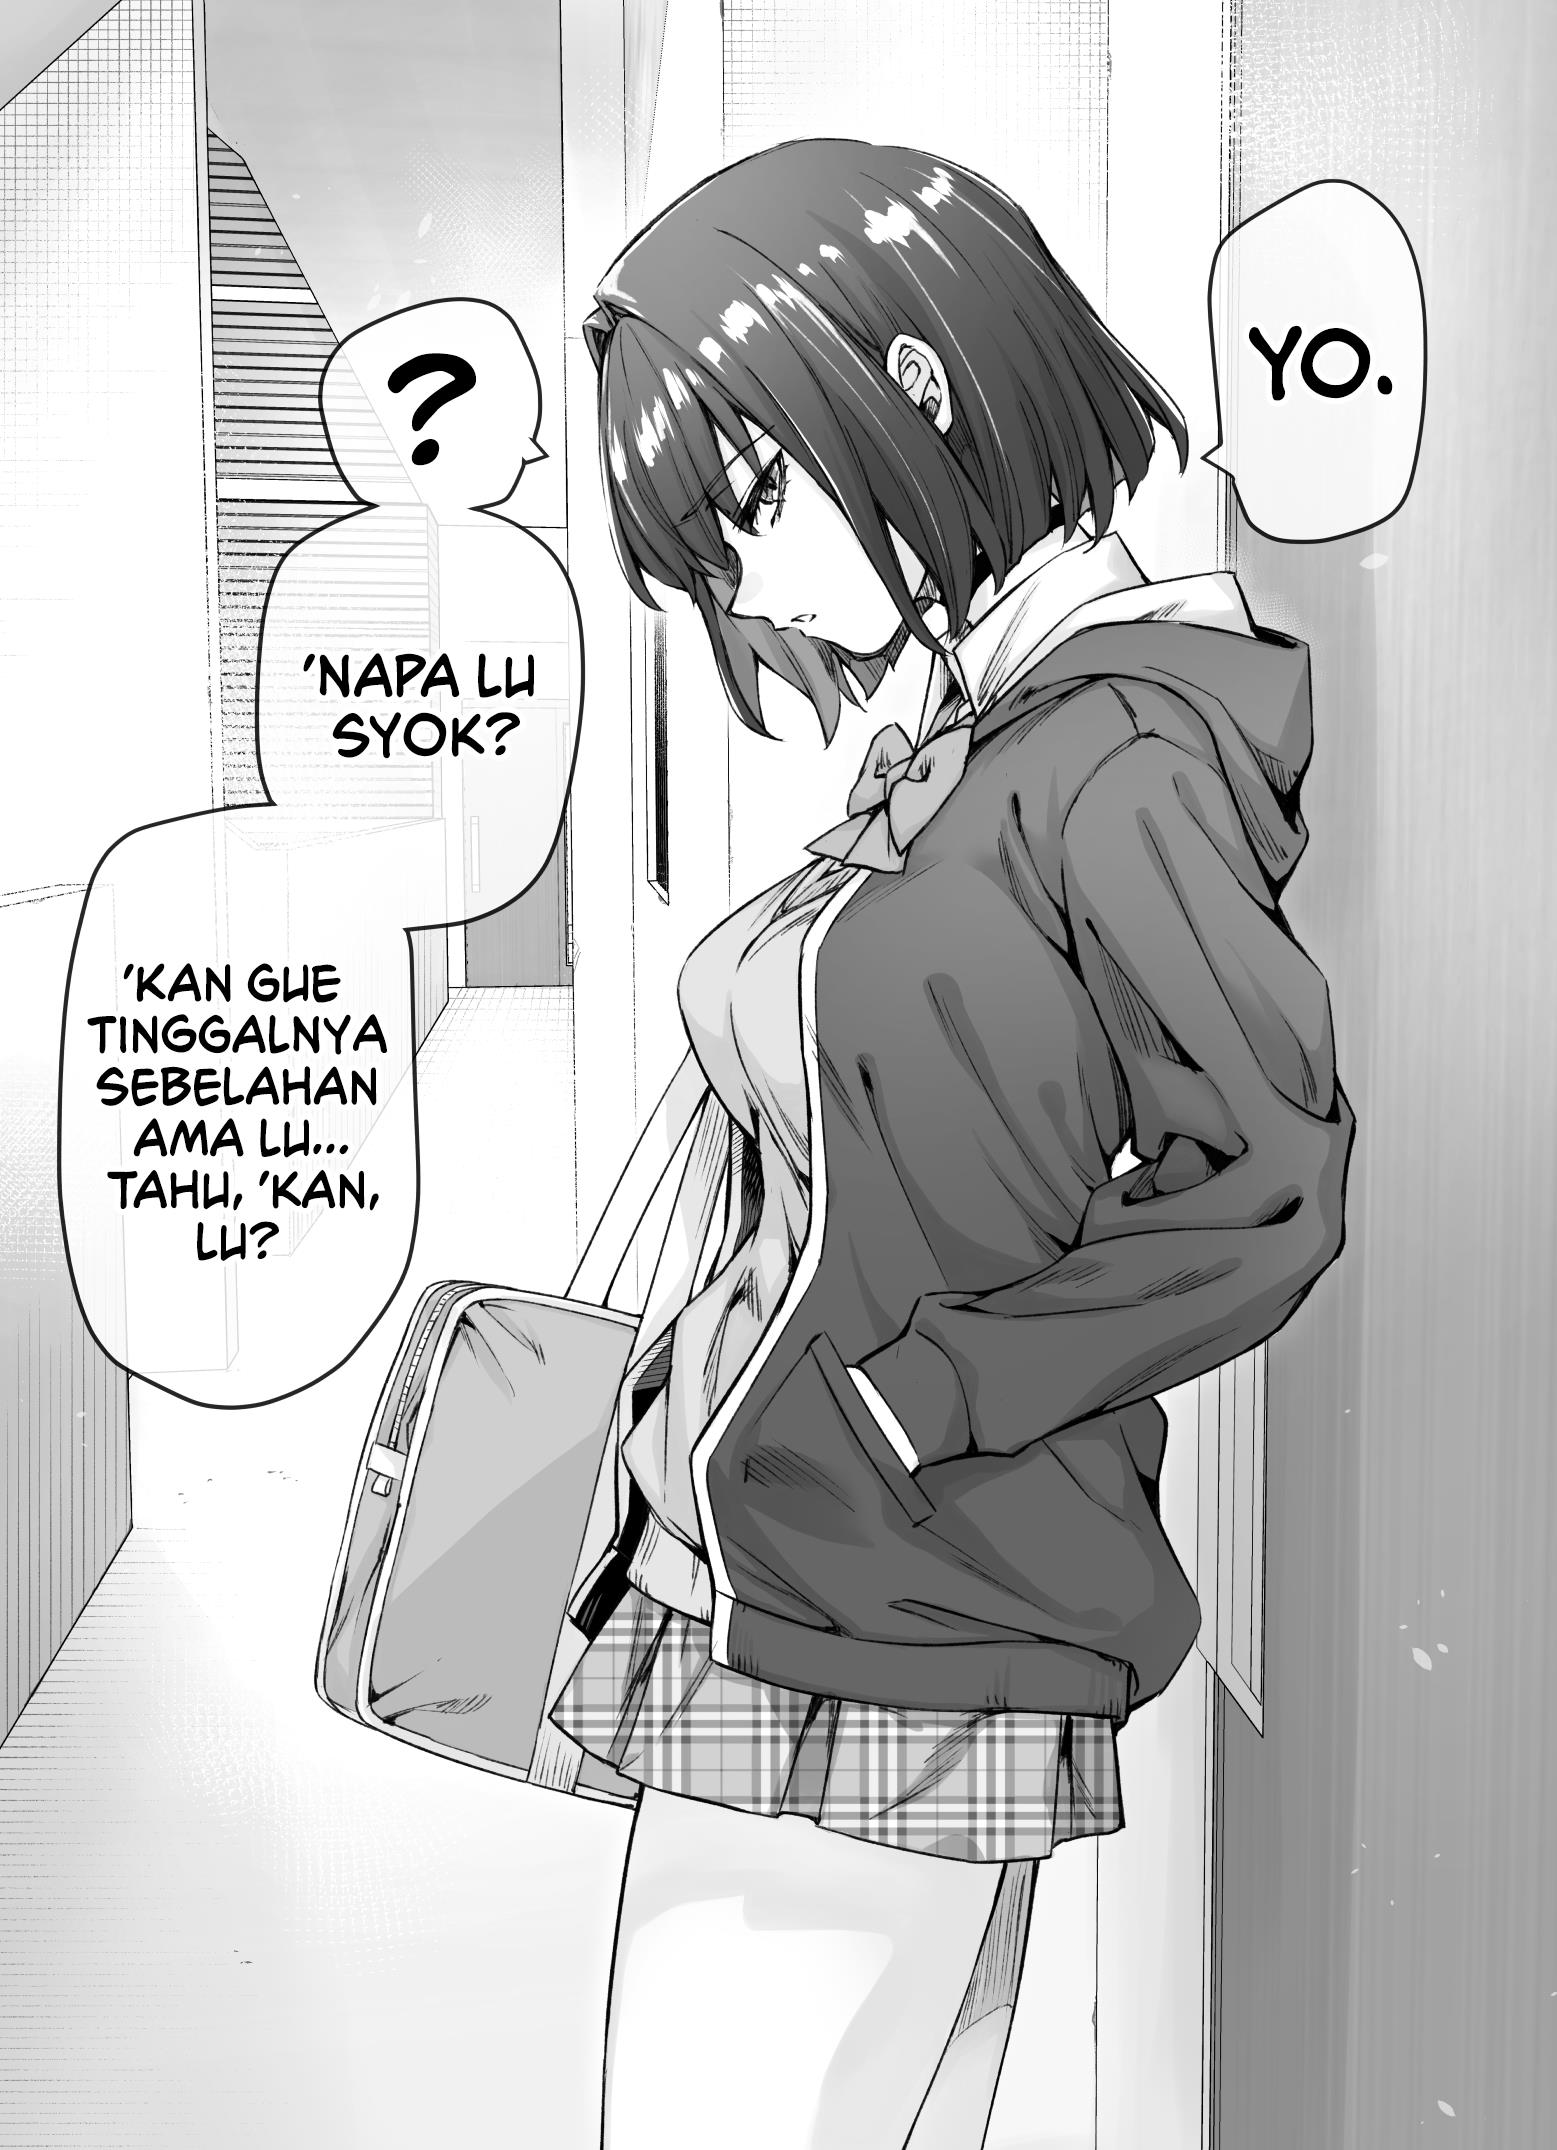 The Tsuntsuntsuntsuntsuntsun tsuntsuntsuntsuntsundere Girl Getting Less and Less Tsun Day by Day Chapter 12.2